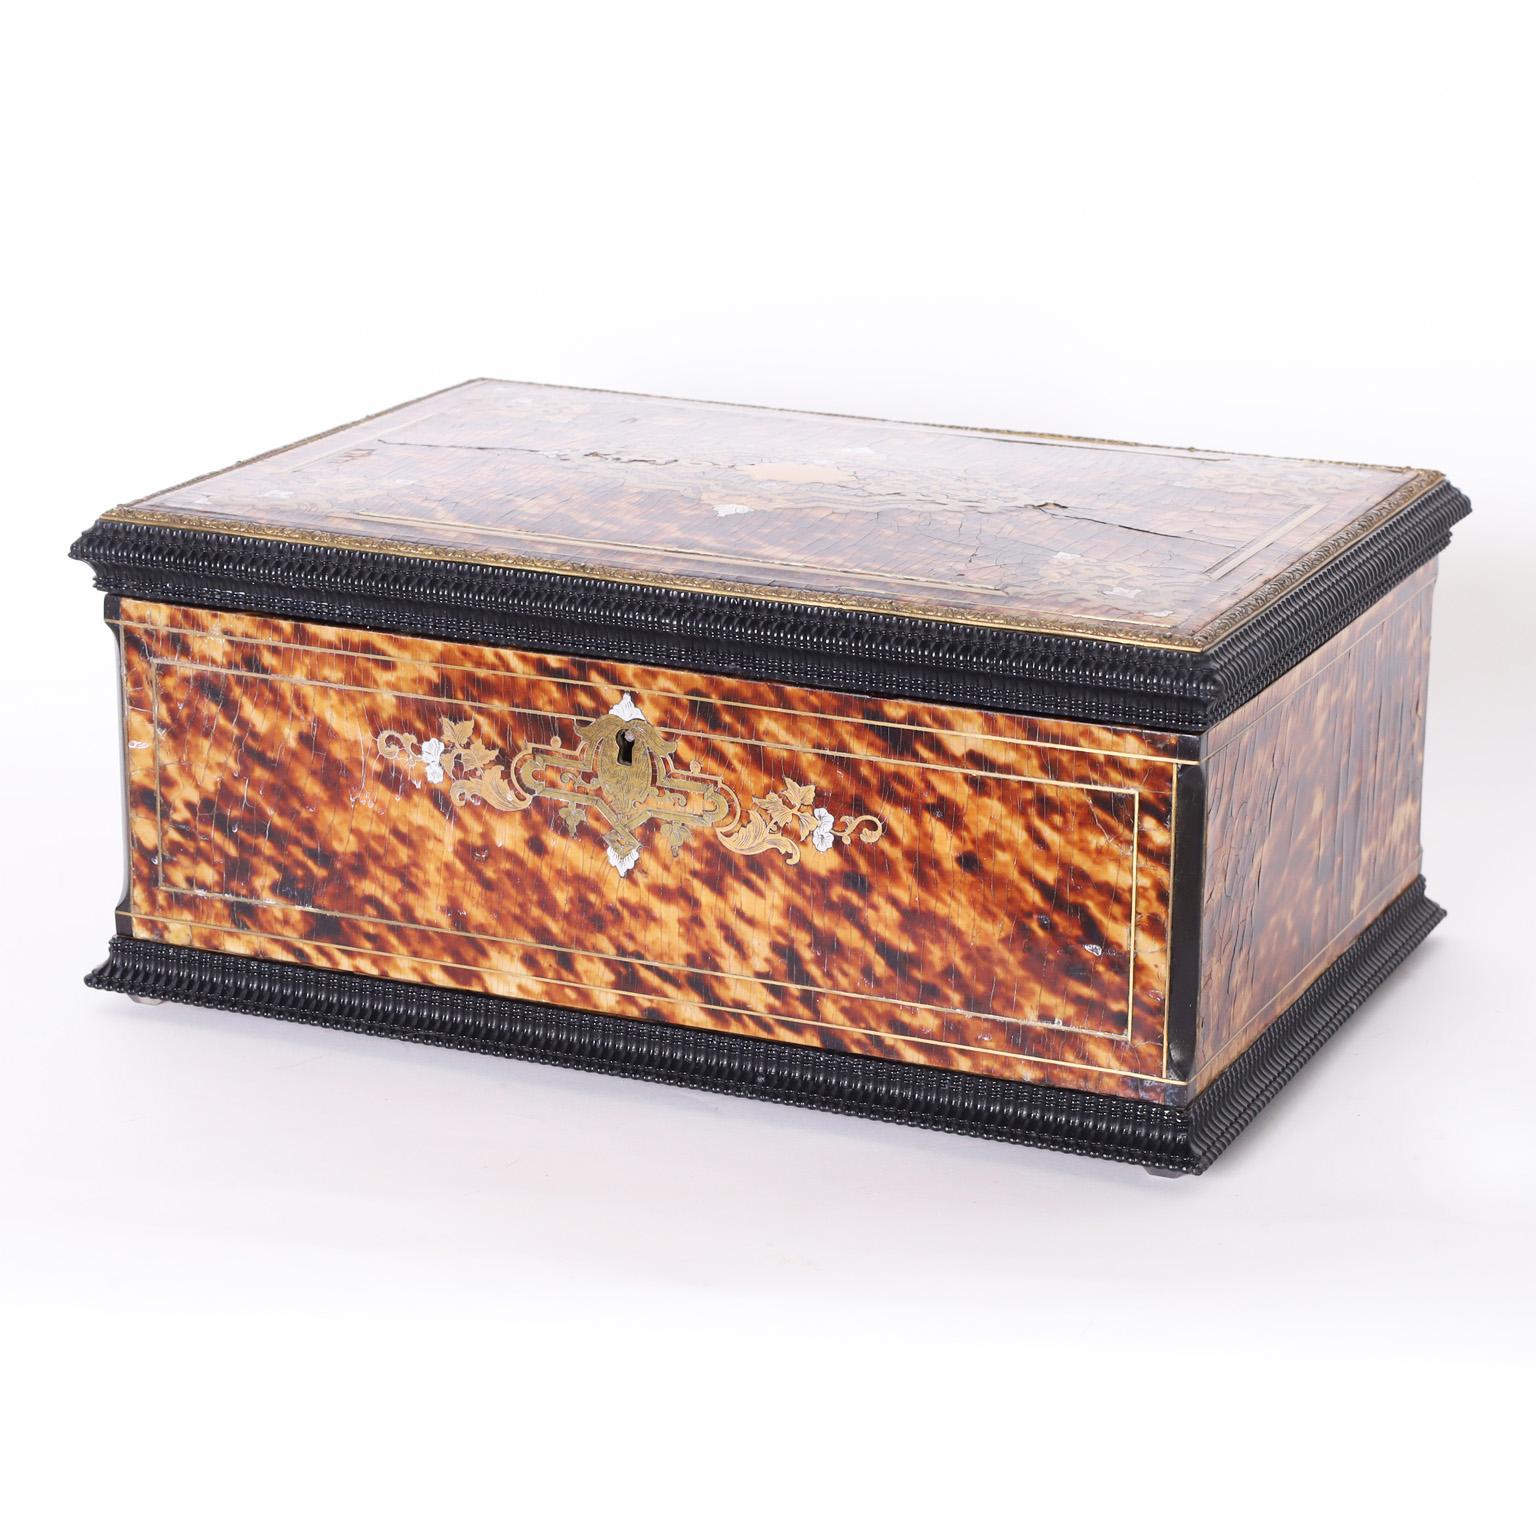 Impressive 19th century French lidded box handcrafted in hardwood clad in tortoise shell and decorated with copper, brass, and metal floral and geometric inlays. The interior is lined with alluring deep blue felt.